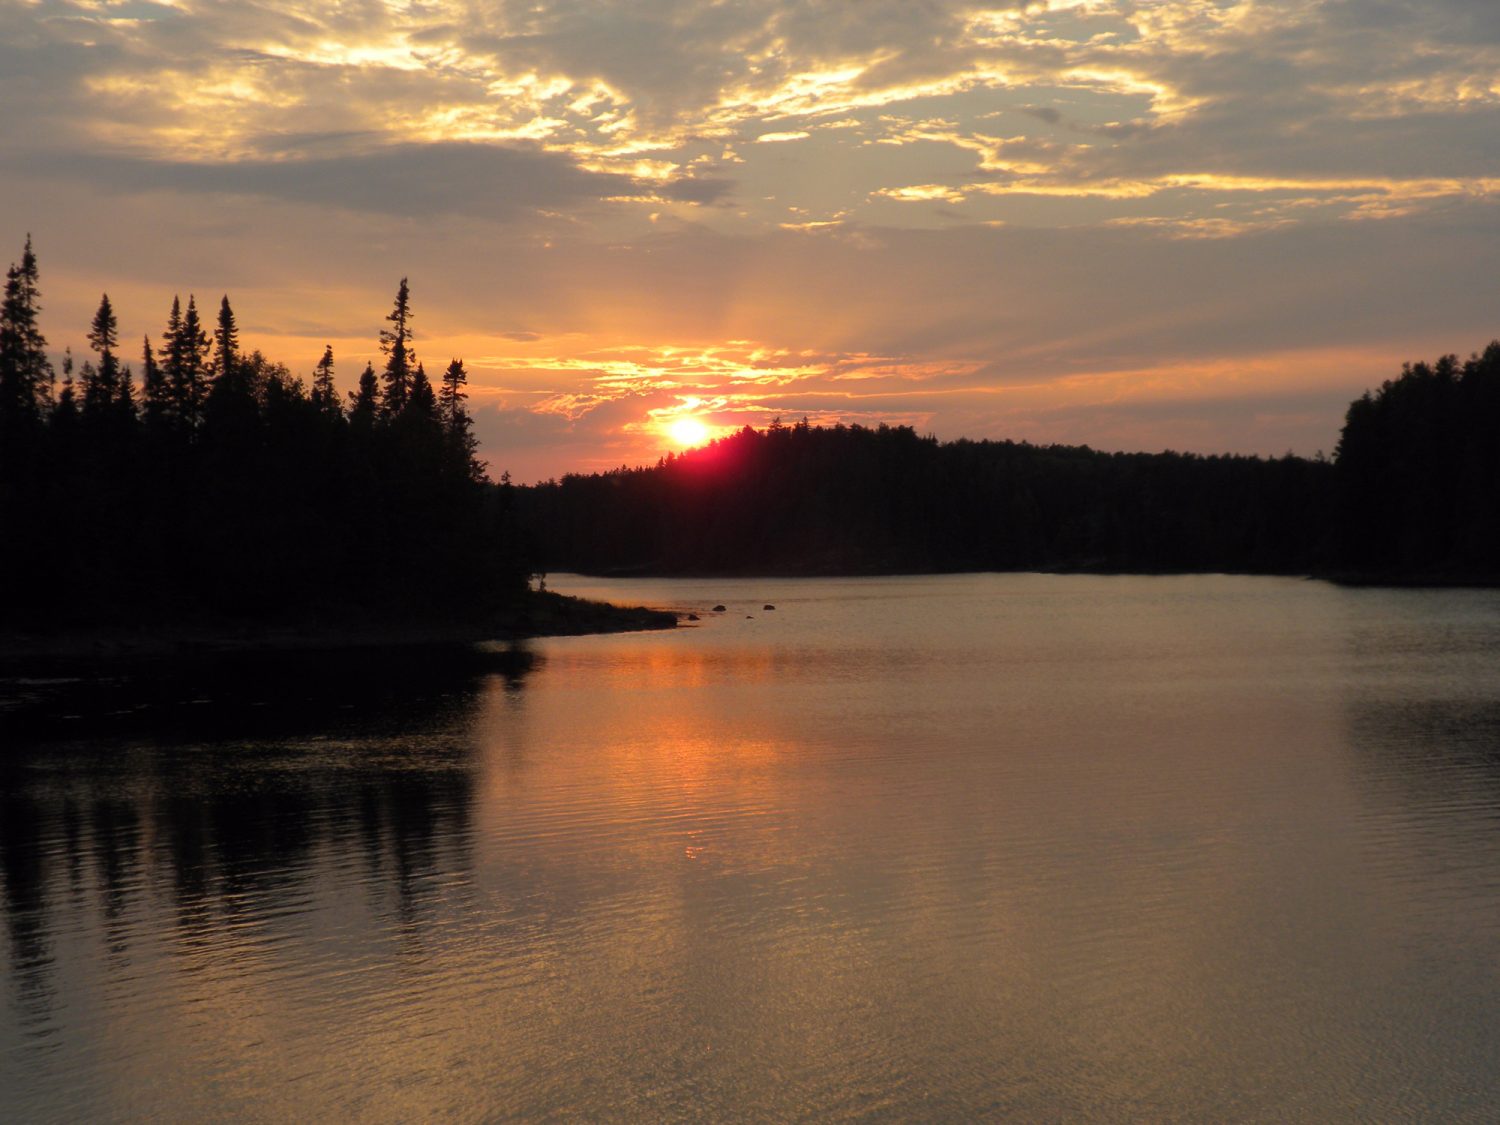 Sunset over the Boundary Waters Canoe Area.